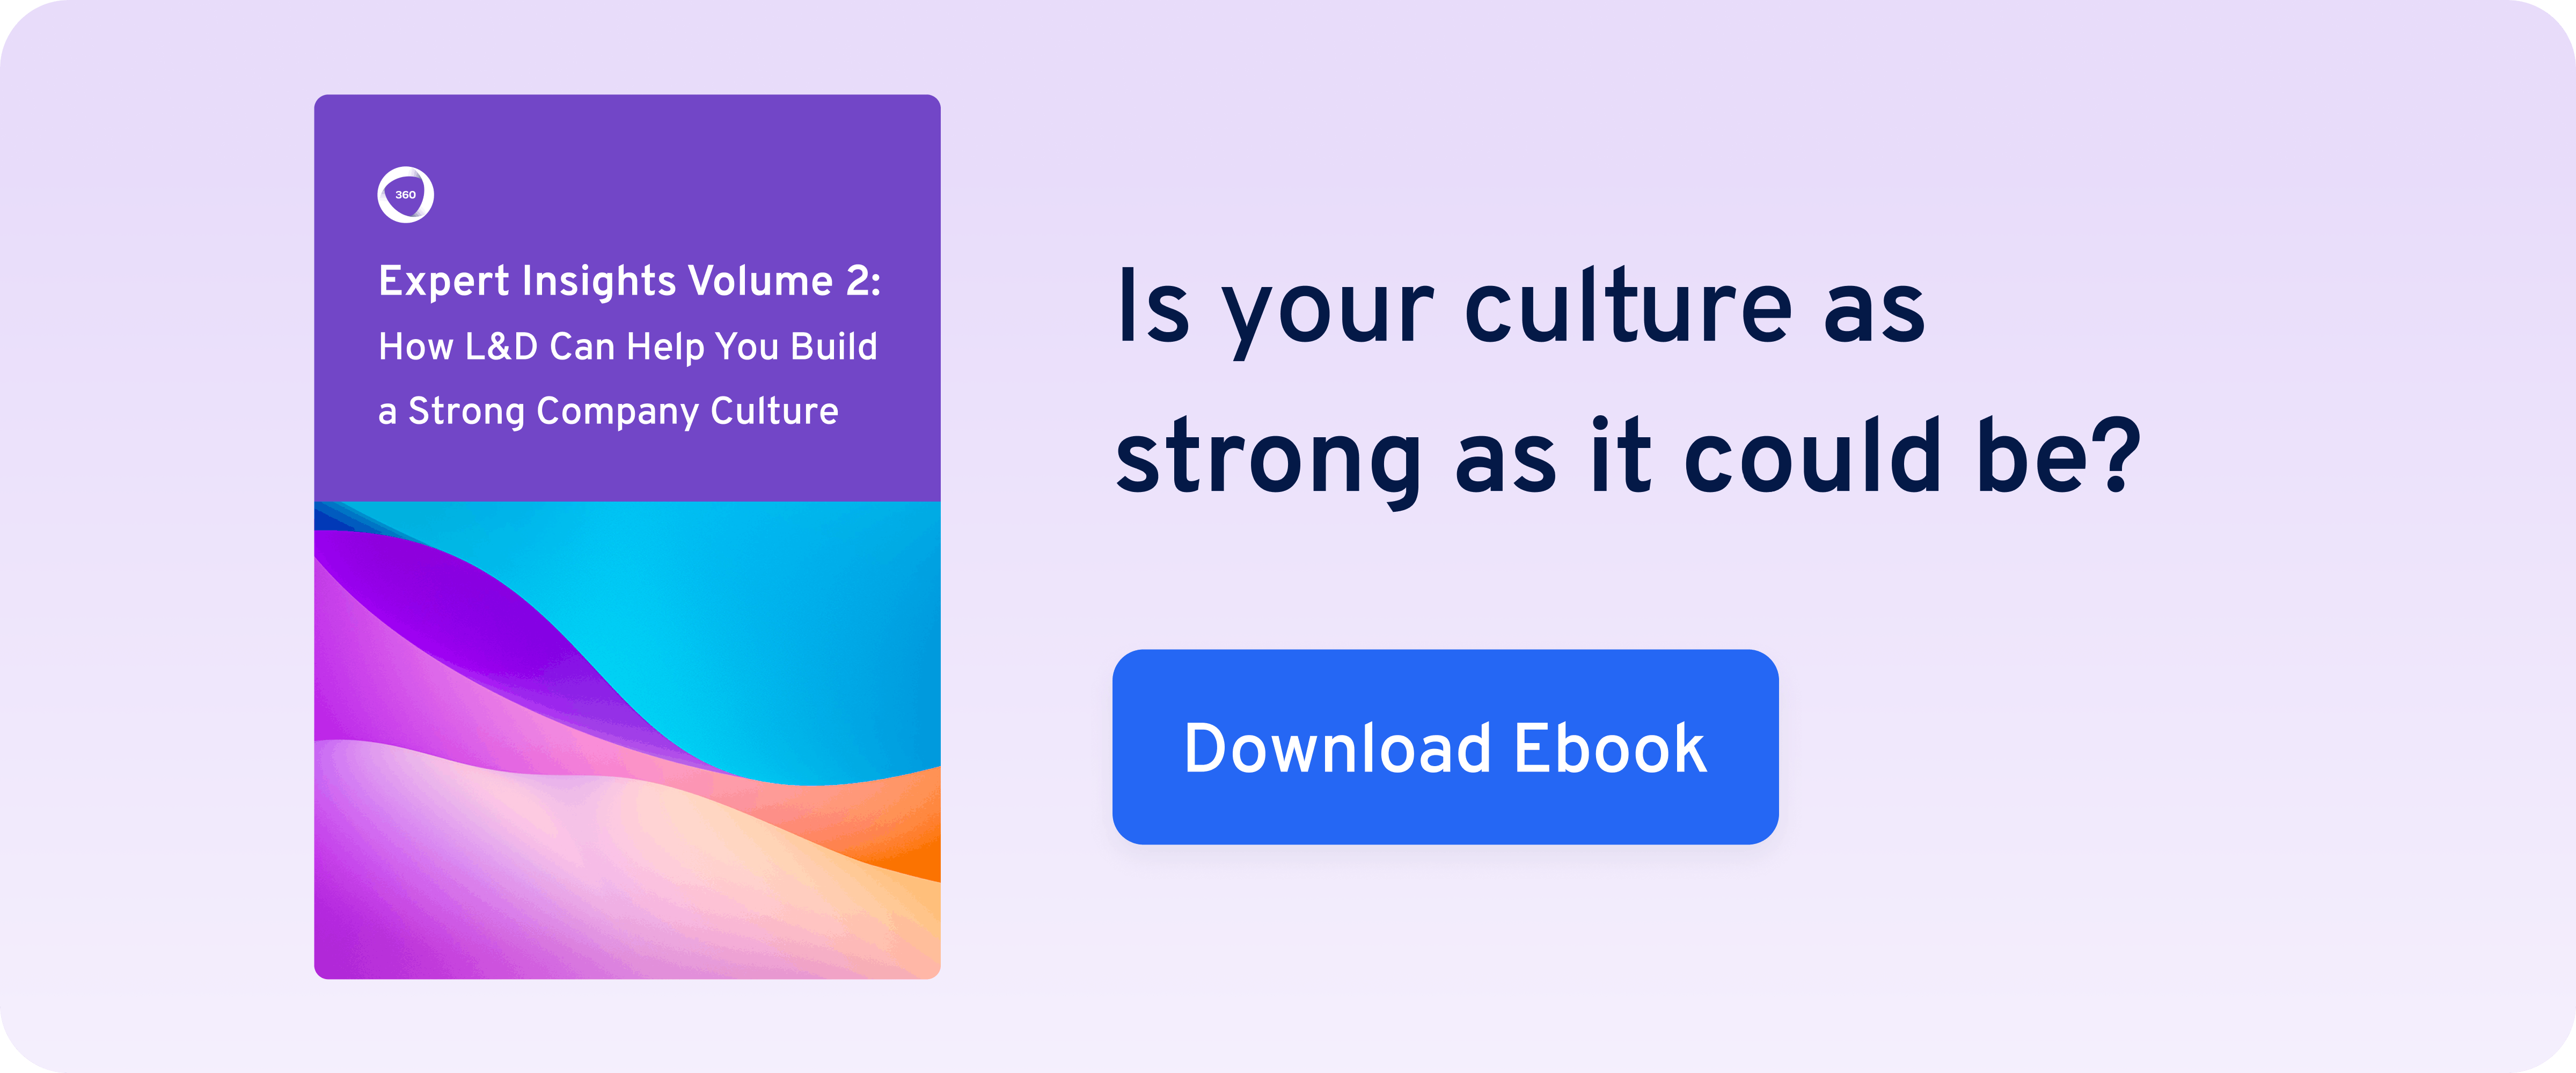 Expert Insights Volume 2: How L&D Can Help You Build a Strong Company Culture